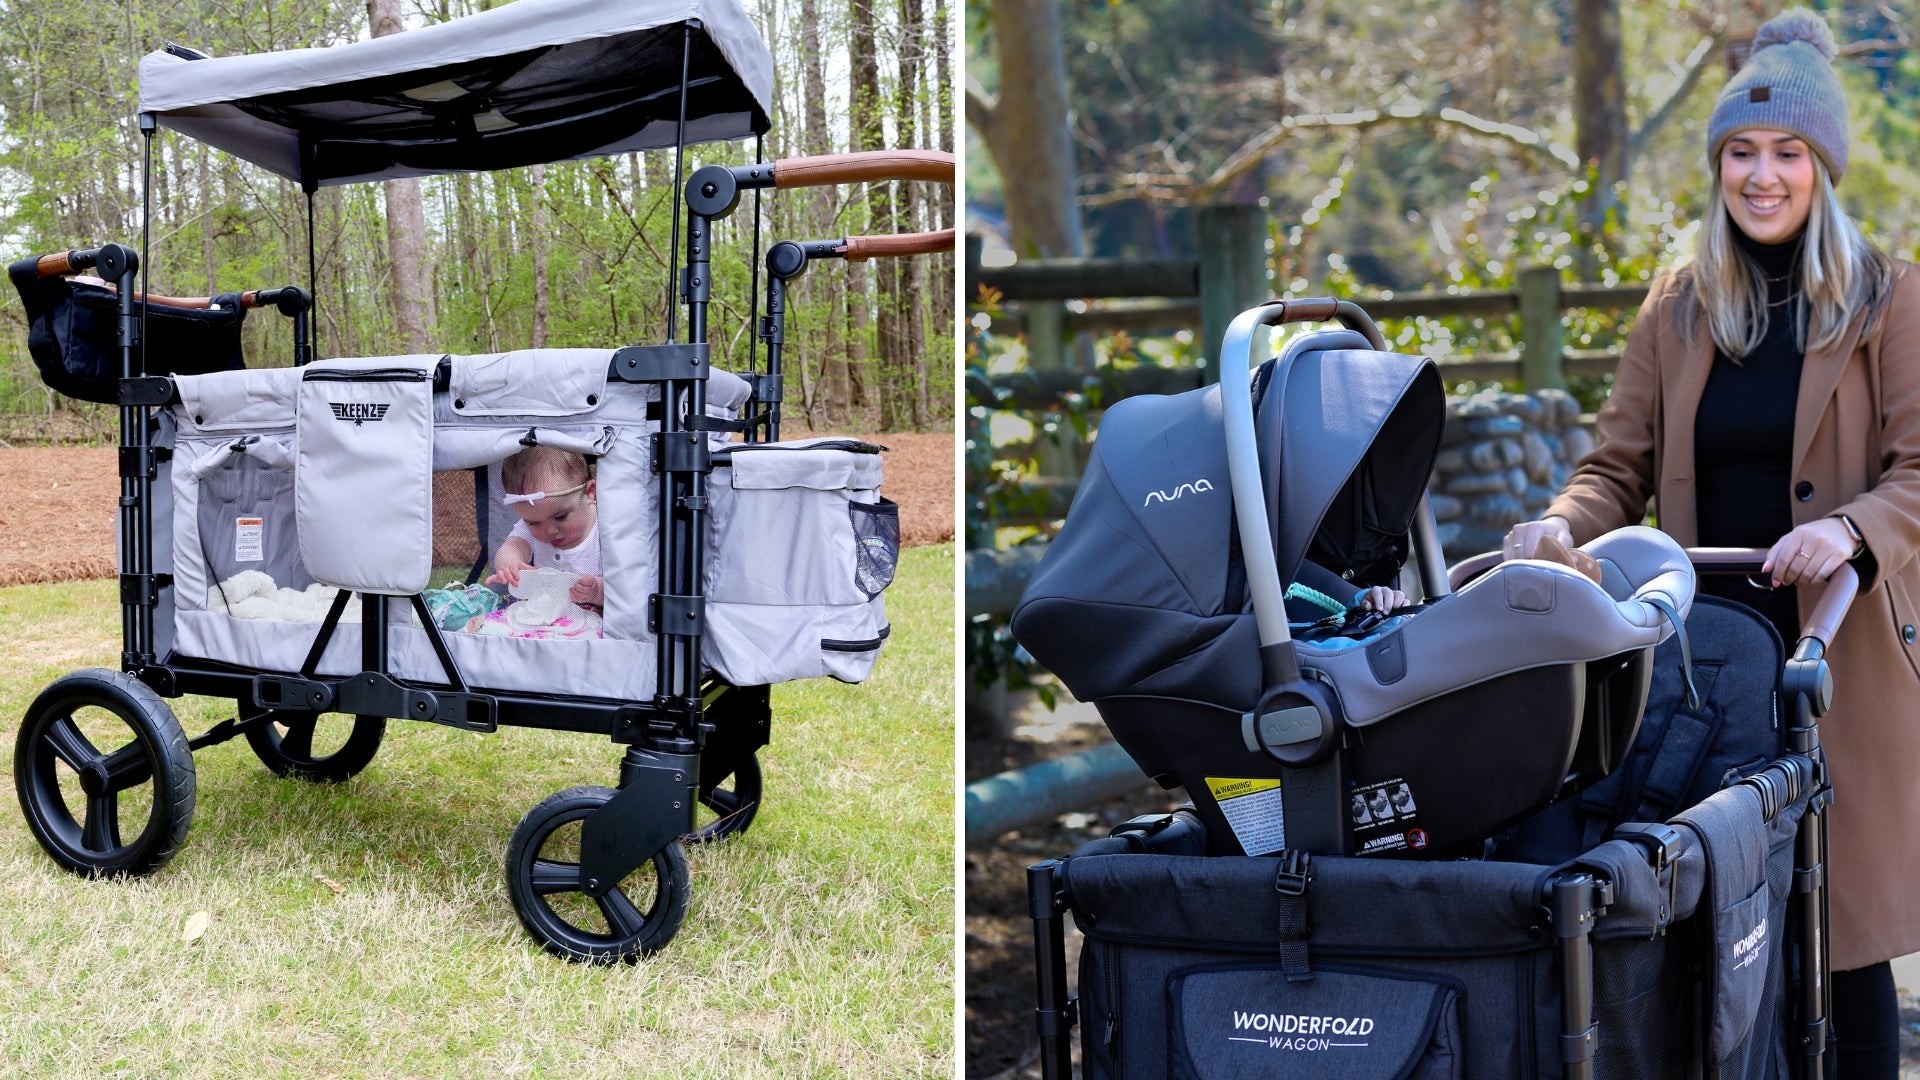 Keenz XC+ picture with baby and WonderFold W4 Luxe picture with car seat attached